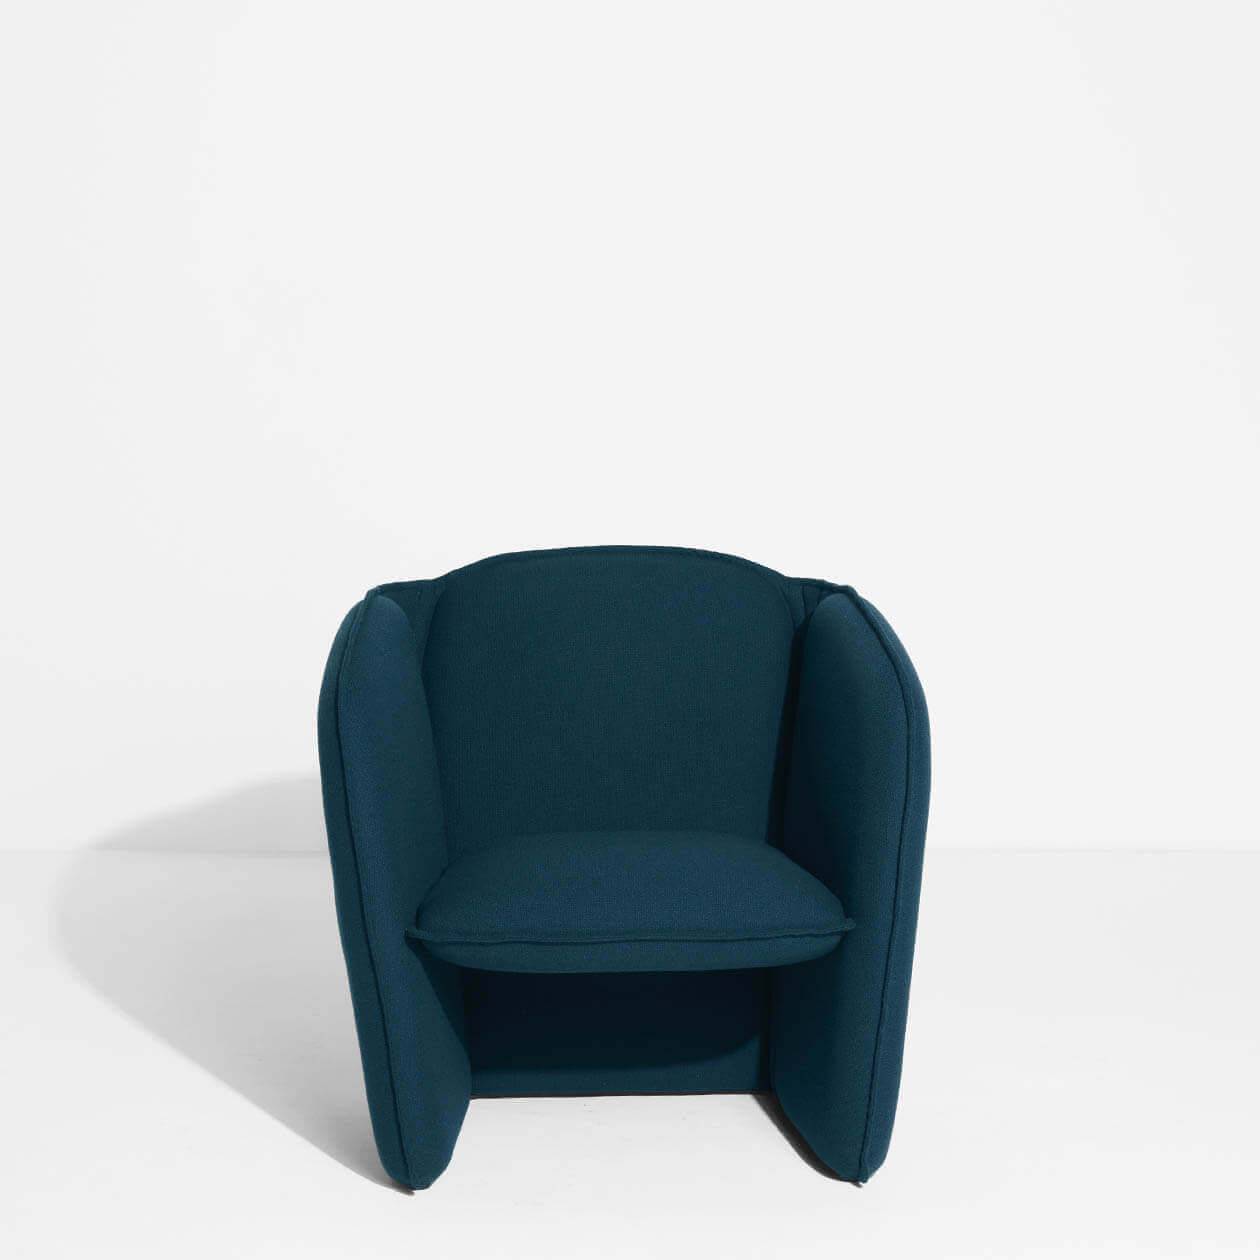 Armchair Lily - navy - Petite Friture